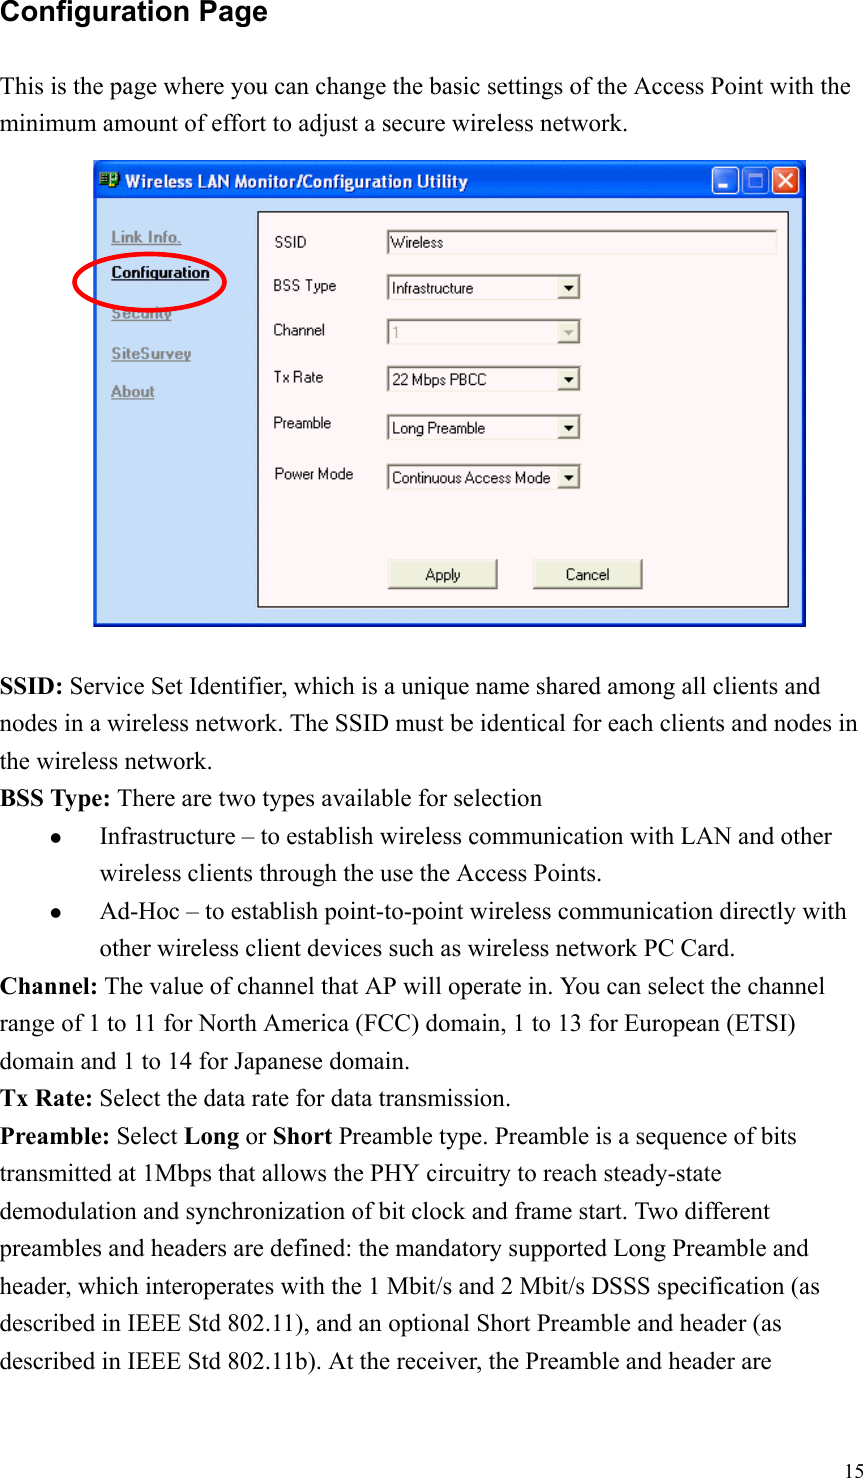 15Configuration PageThis is the page where you can change the basic settings of the Access Point with theminimum amount of effort to adjust a secure wireless network.SSID: Service Set Identifier, which is a unique name shared among all clients andnodes in a wireless network. The SSID must be identical for each clients and nodes inthe wireless network.BSS Type: There are two types available for selectionz Infrastructure – to establish wireless communication with LAN and otherwireless clients through the use the Access Points.z Ad-Hoc – to establish point-to-point wireless communication directly withother wireless client devices such as wireless network PC Card.Channel: The value of channel that AP will operate in. You can select the channelrange of 1 to 11 for North America (FCC) domain, 1 to 13 for European (ETSI)domain and 1 to 14 for Japanese domain.Tx Rate: Select the data rate for data transmission.Preamble: Select Long or Short Preamble type. Preamble is a sequence of bitstransmitted at 1Mbps that allows the PHY circuitry to reach steady-statedemodulation and synchronization of bit clock and frame start. Two differentpreambles and headers are defined: the mandatory supported Long Preamble andheader, which interoperates with the 1 Mbit/s and 2 Mbit/s DSSS specification (asdescribed in IEEE Std 802.11), and an optional Short Preamble and header (asdescribed in IEEE Std 802.11b). At the receiver, the Preamble and header are